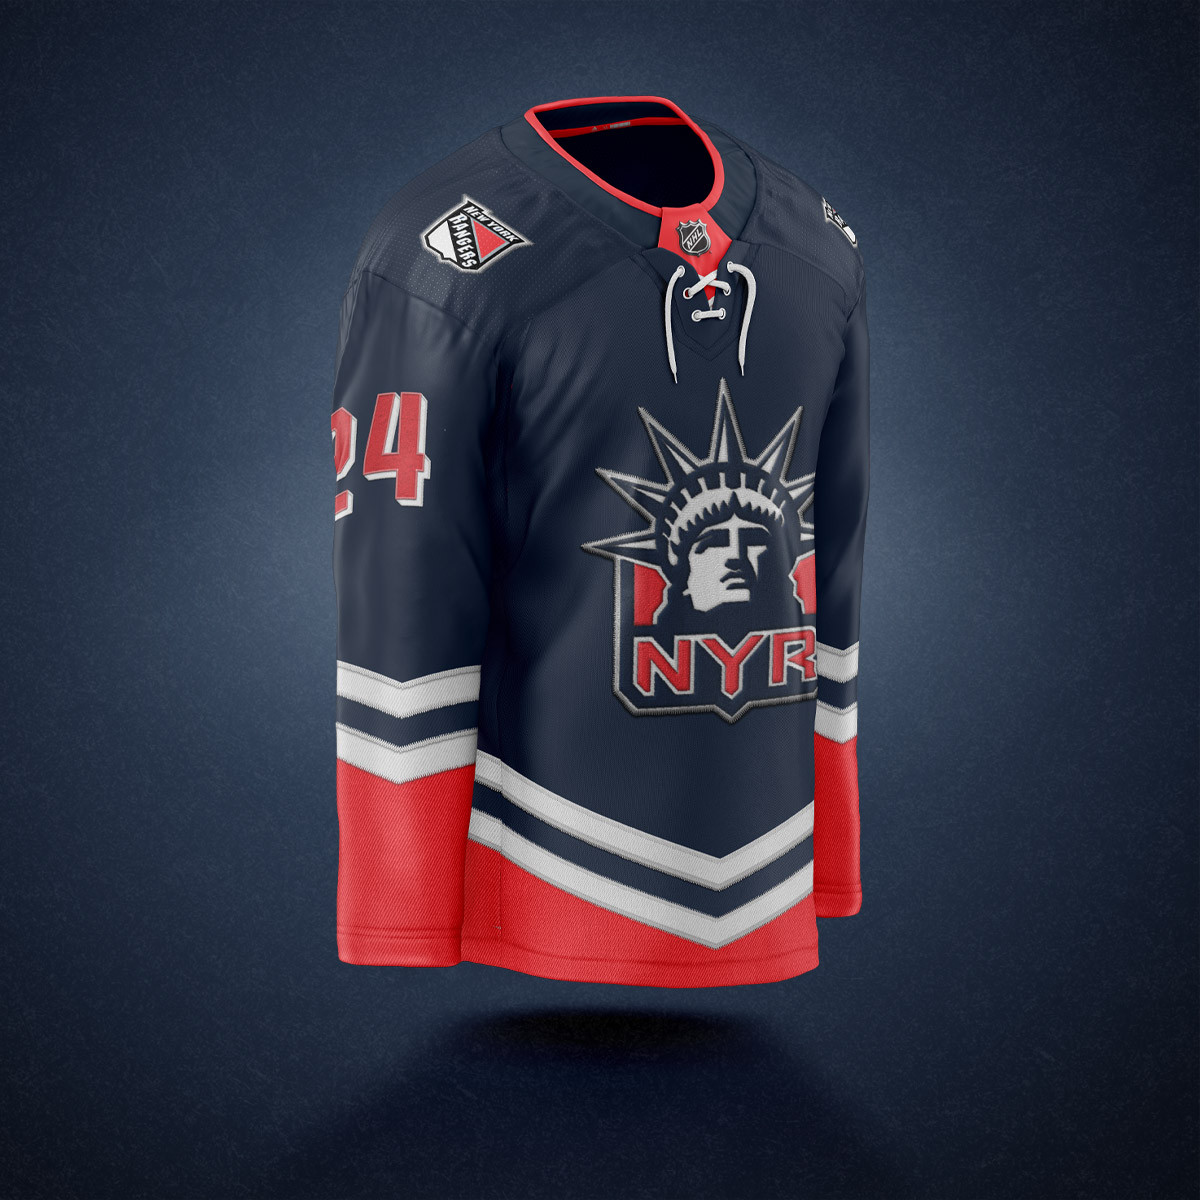 NY Rangers unveil alternate jersey, bring back Statue of Liberty look